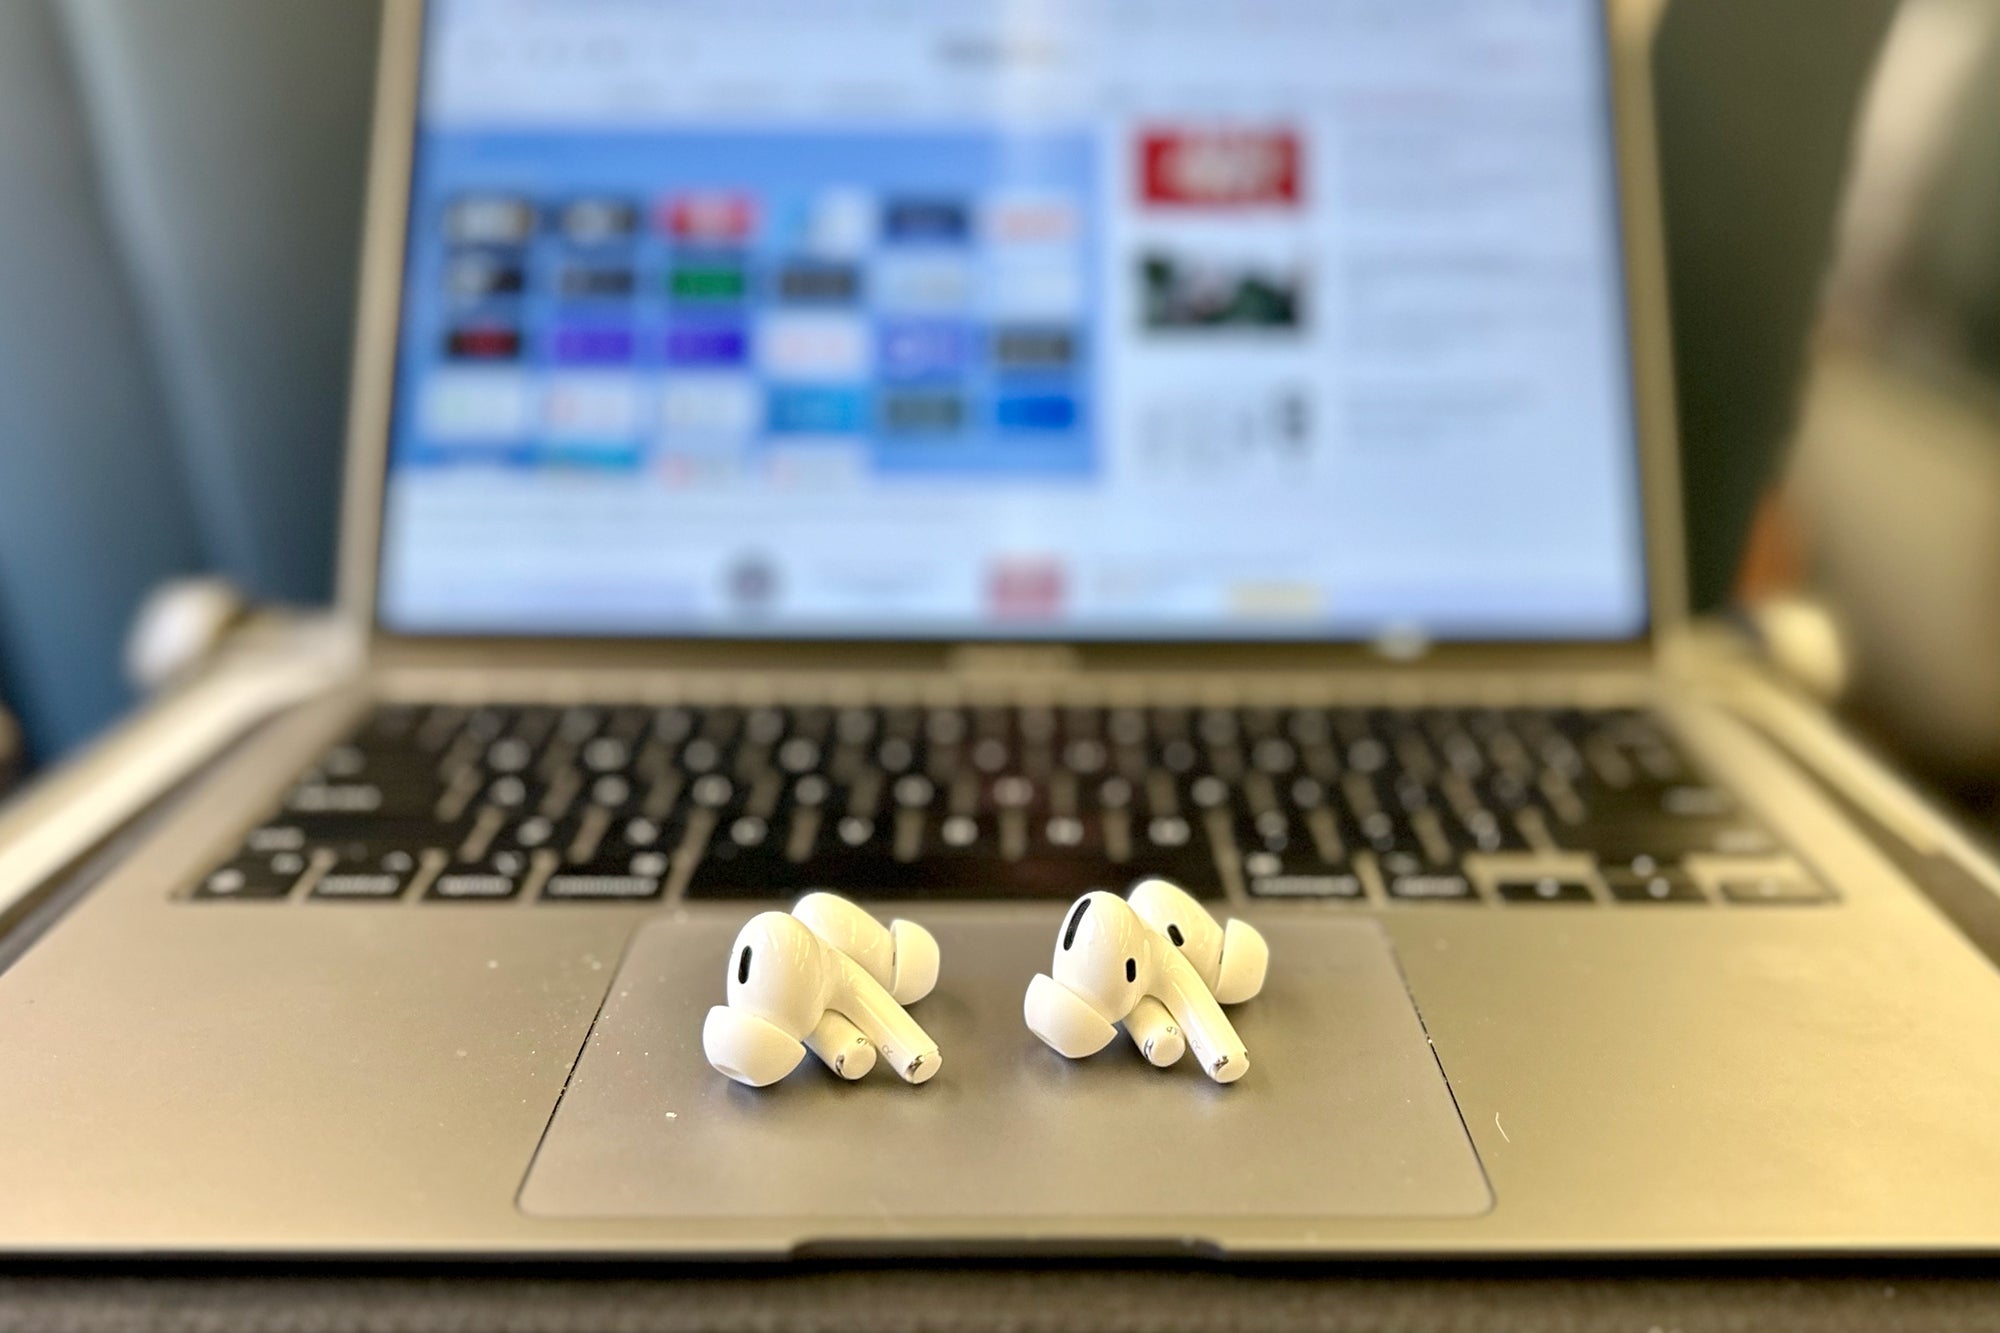 Apple AirPods Pro 1 & 2 side-by-side on a MacBook